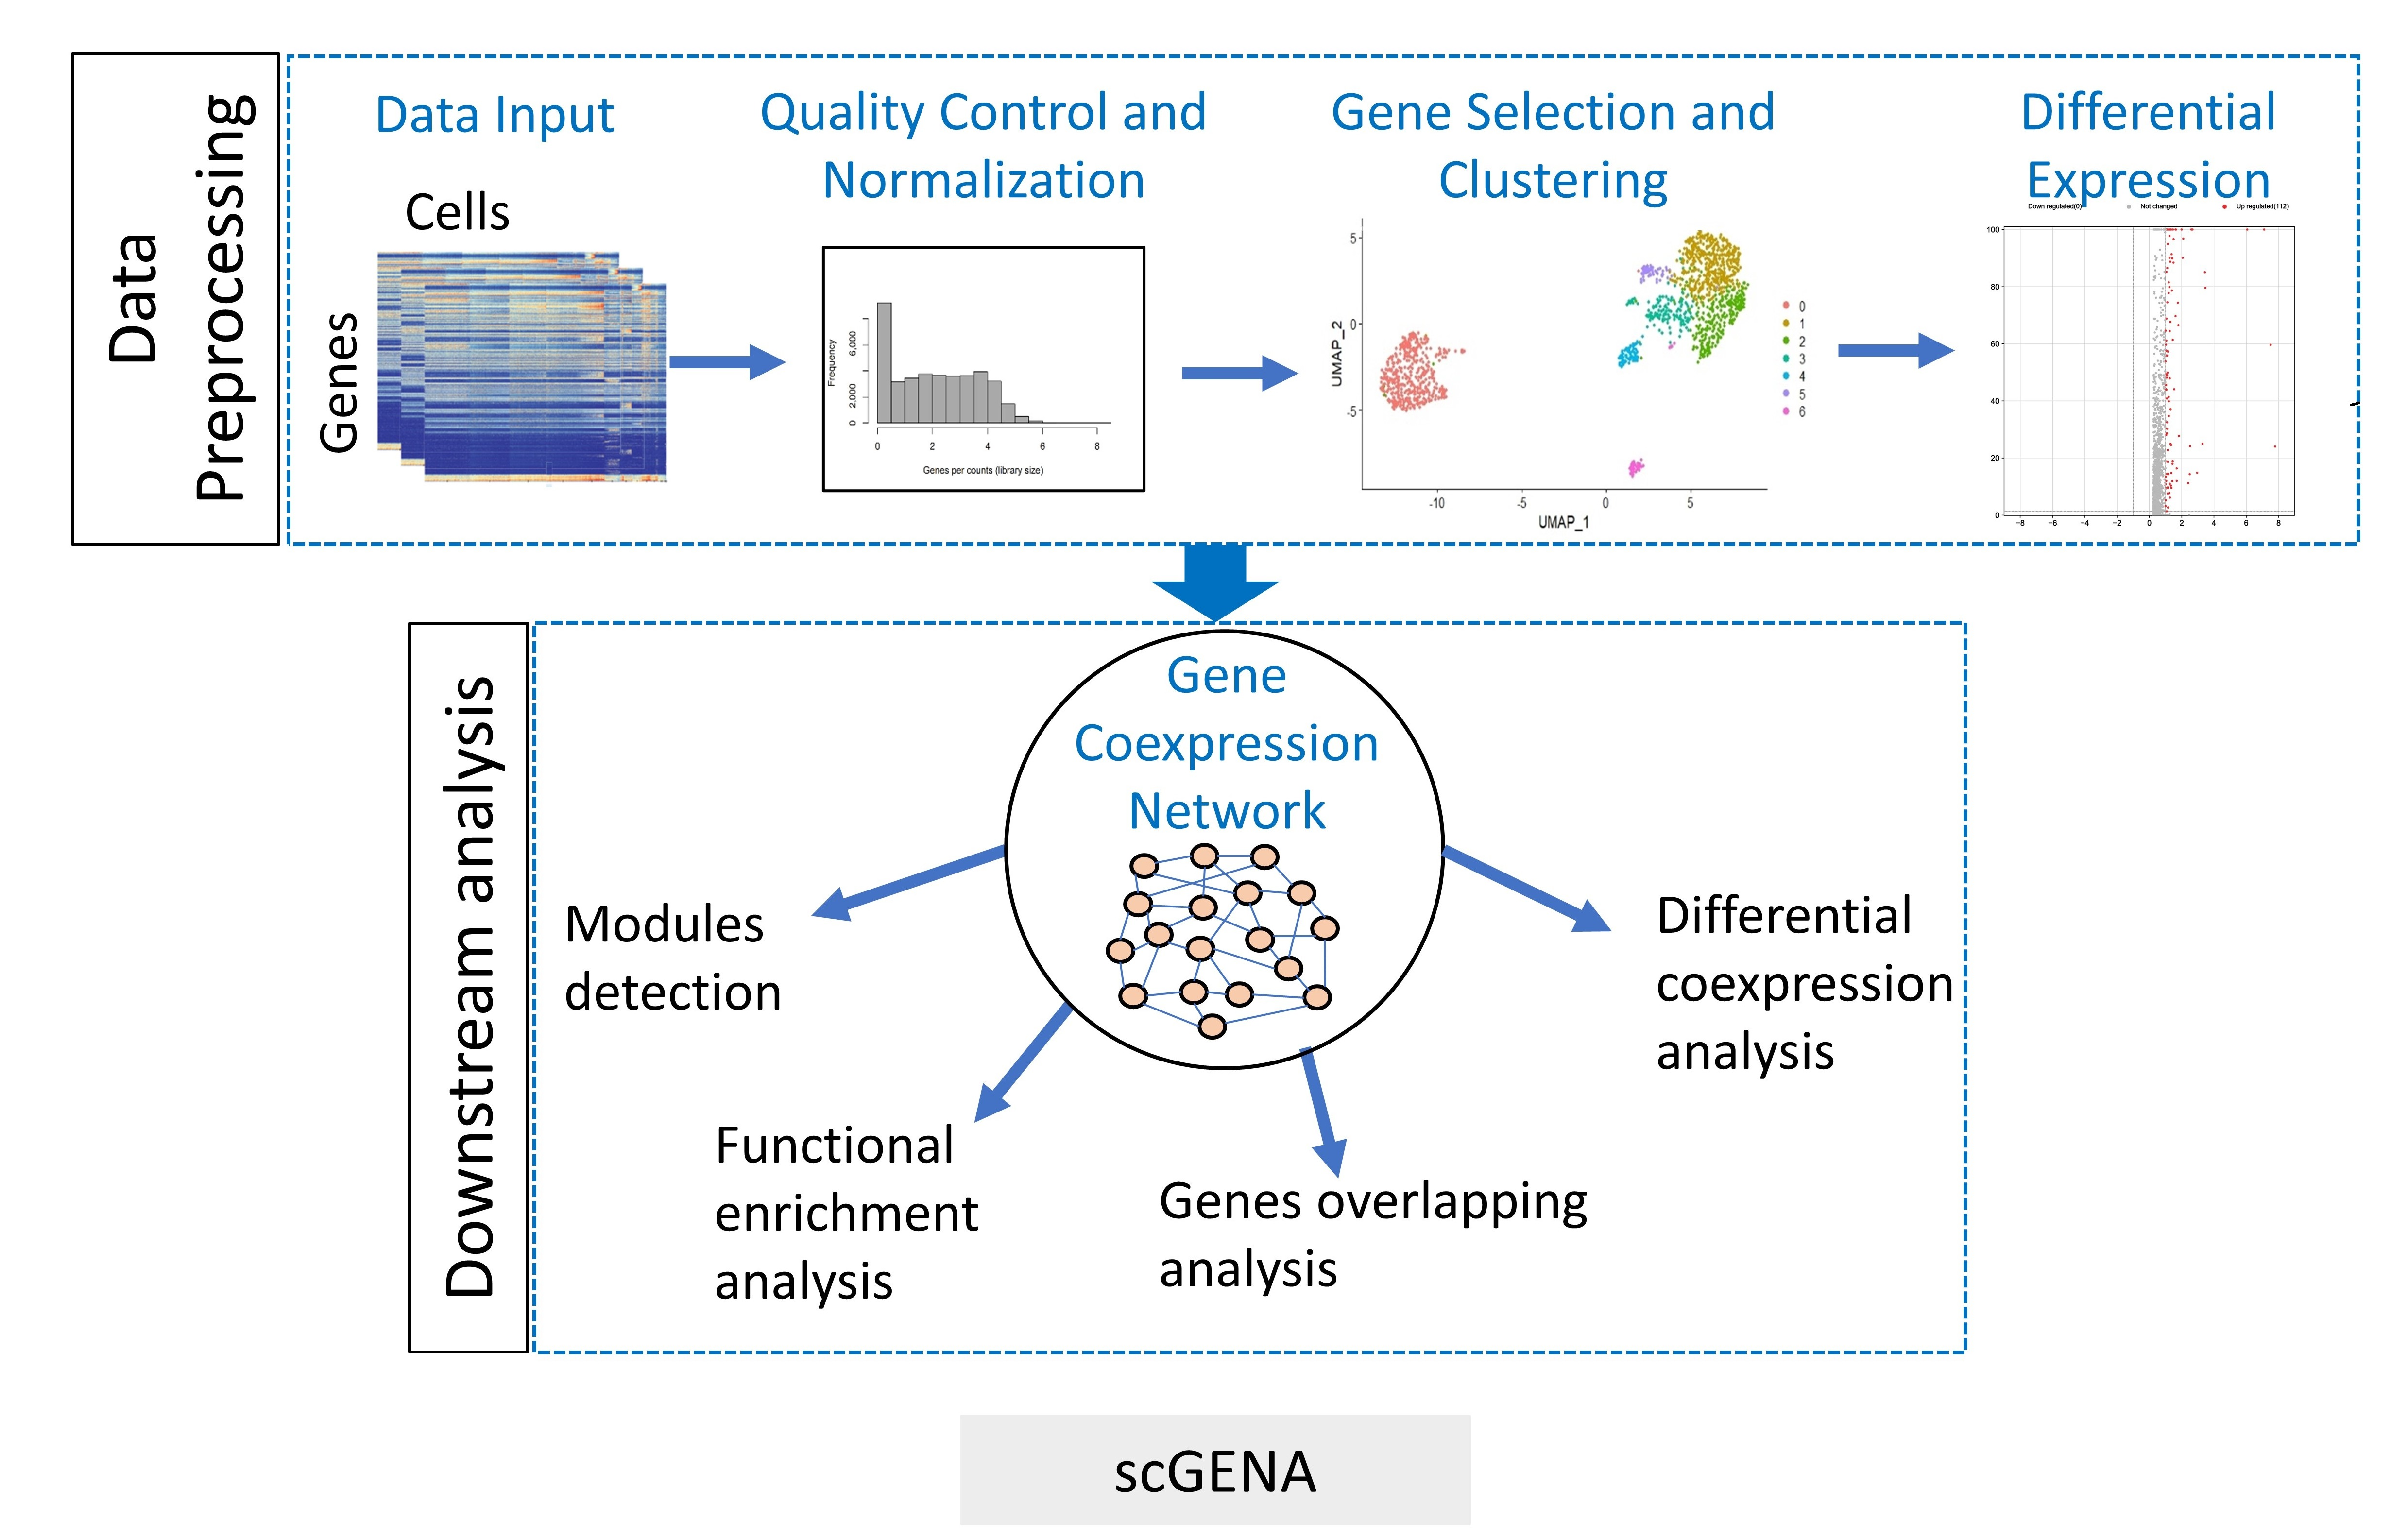 GWENA: gene co-expression networks analysis and extended modules  characterization in a single Bioconductor package, BMC Bioinformatics